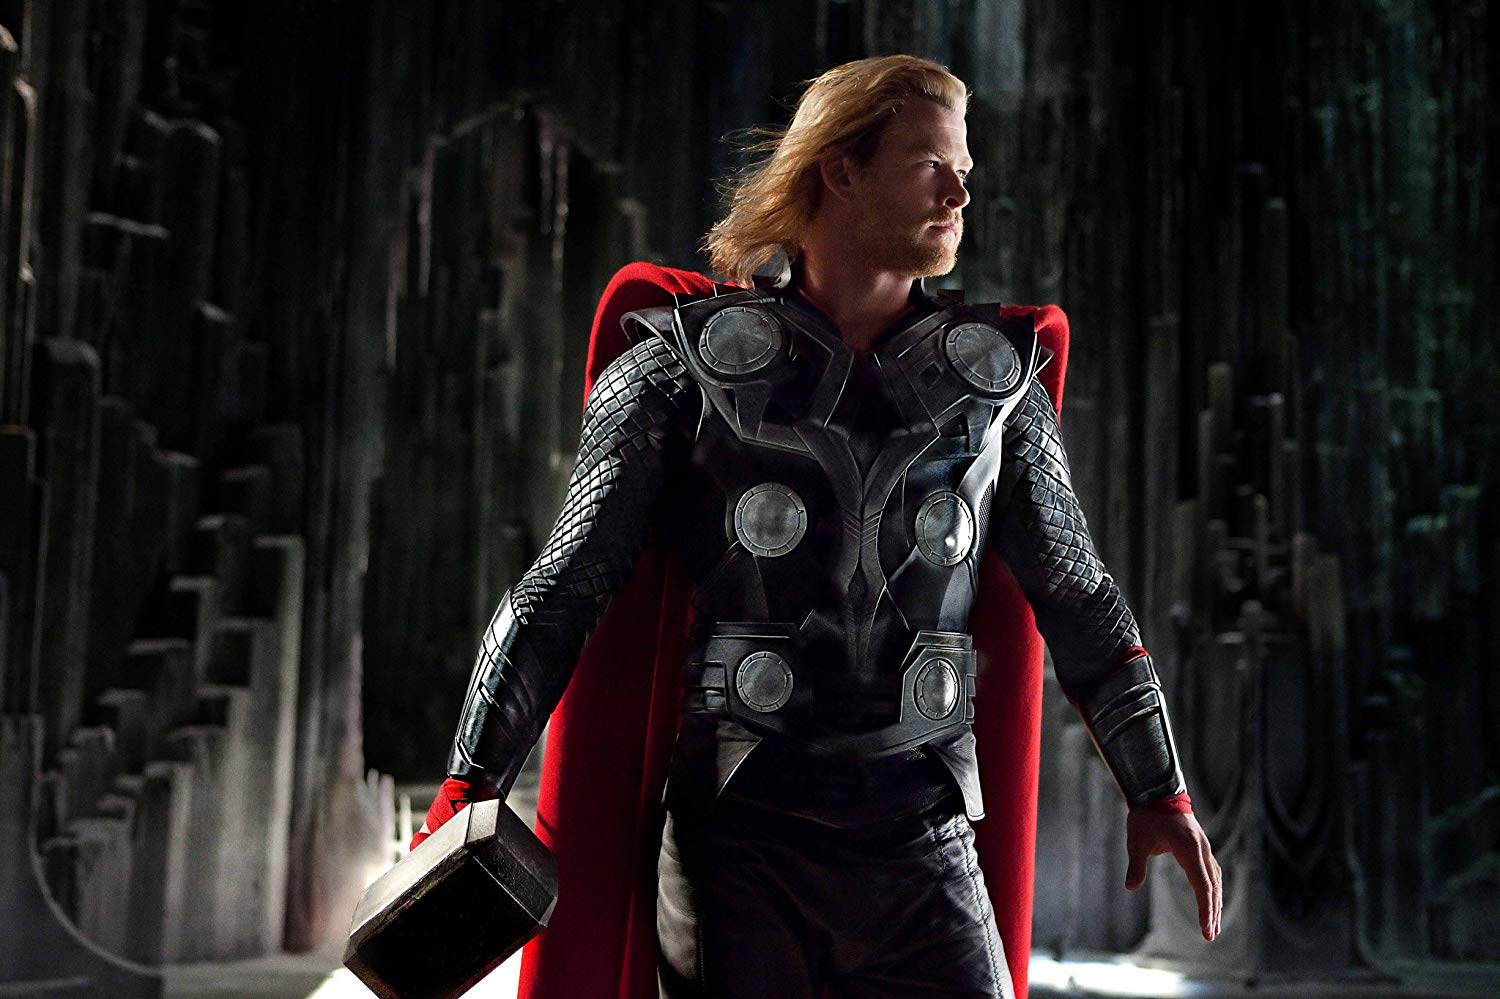 MOVIE REVIEW: Thor — Every Movie Has a Lesson